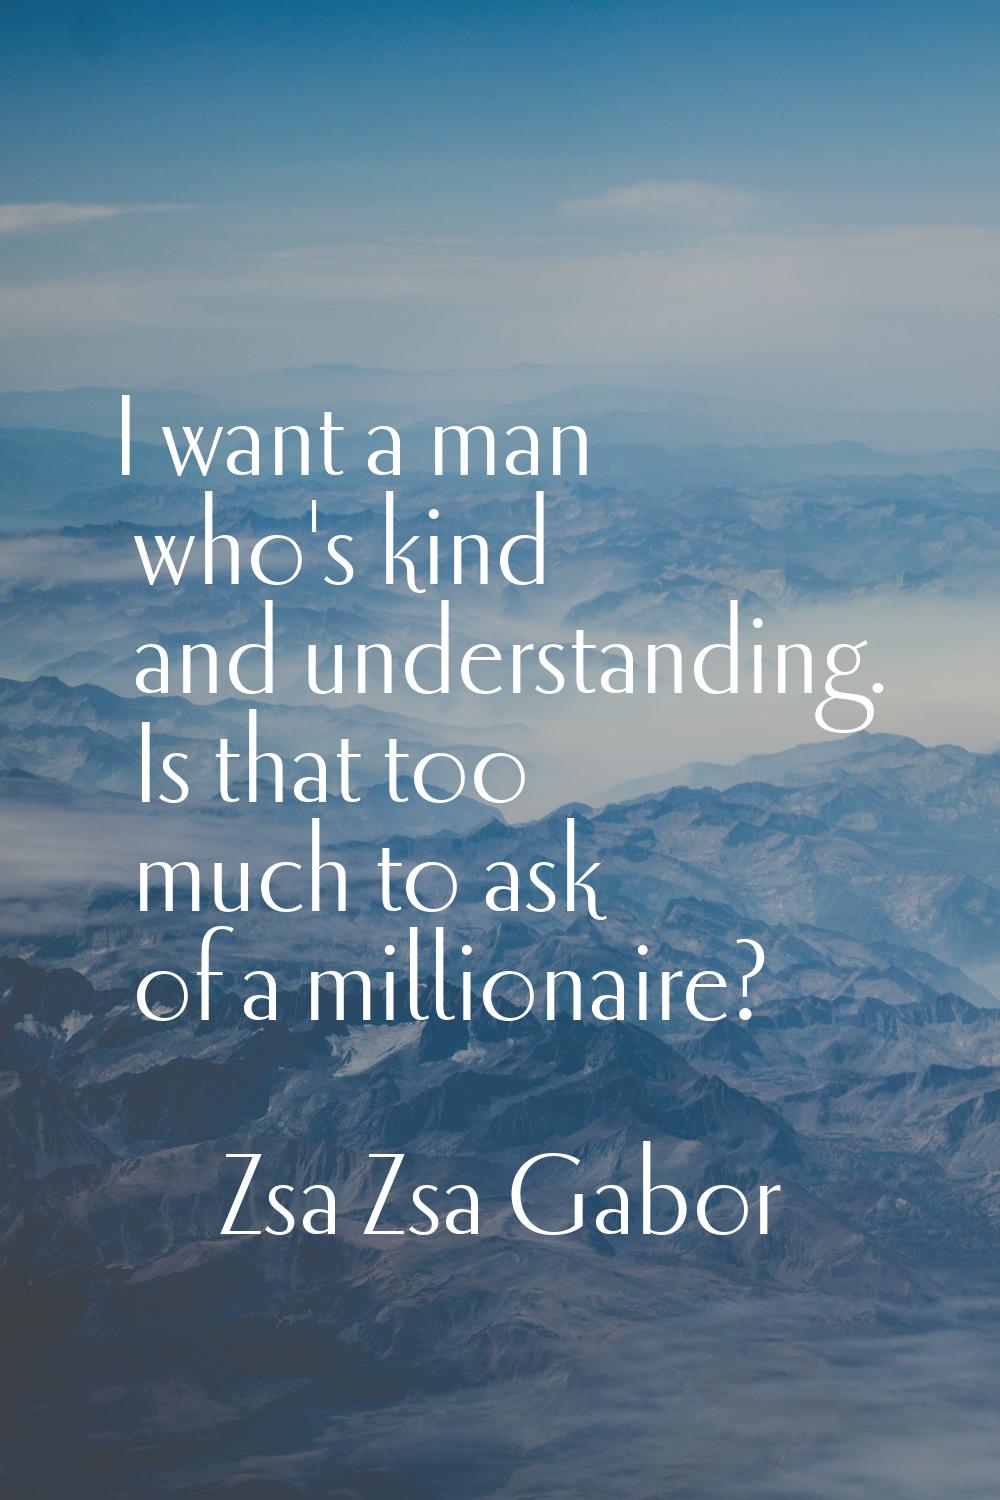 I want a man who's kind and understanding. Is that too much to ask of a millionaire?